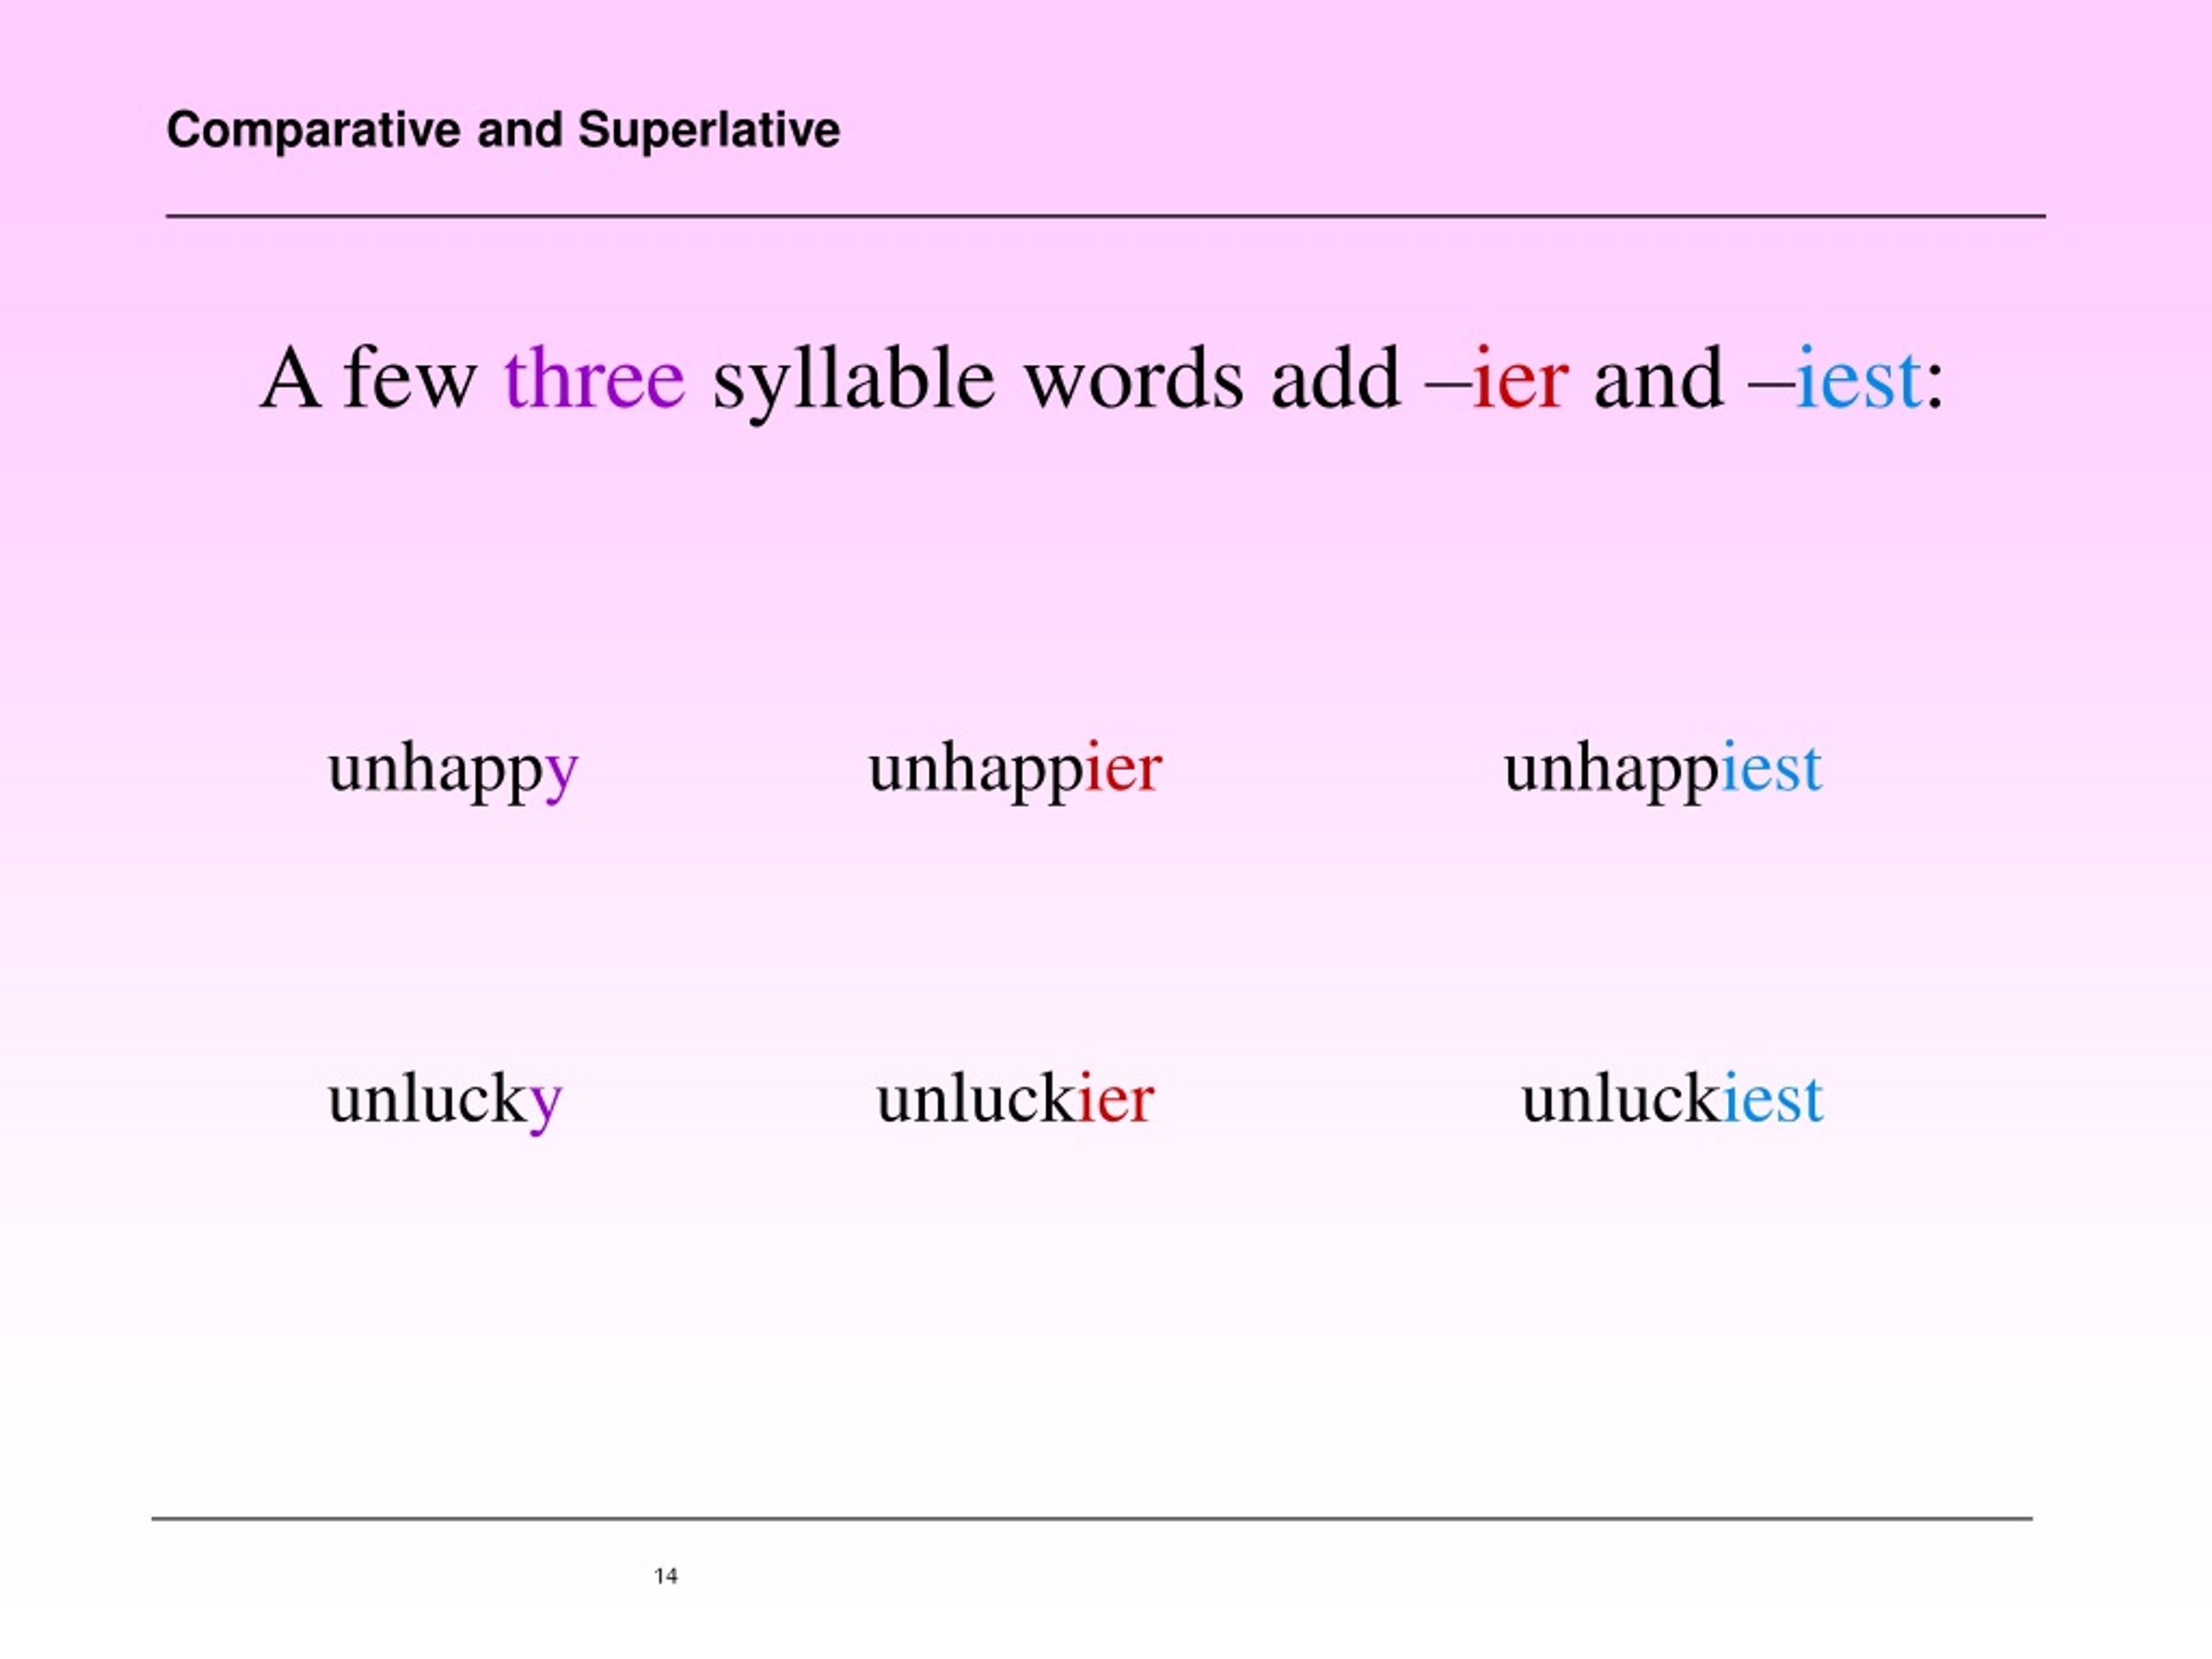 Comparative and superlative words. Comparatives and Superlatives. Предложения Comparative and Superlative. Few Comparative and Superlative. Comparative and Superlatives упражнения 3 syllables.